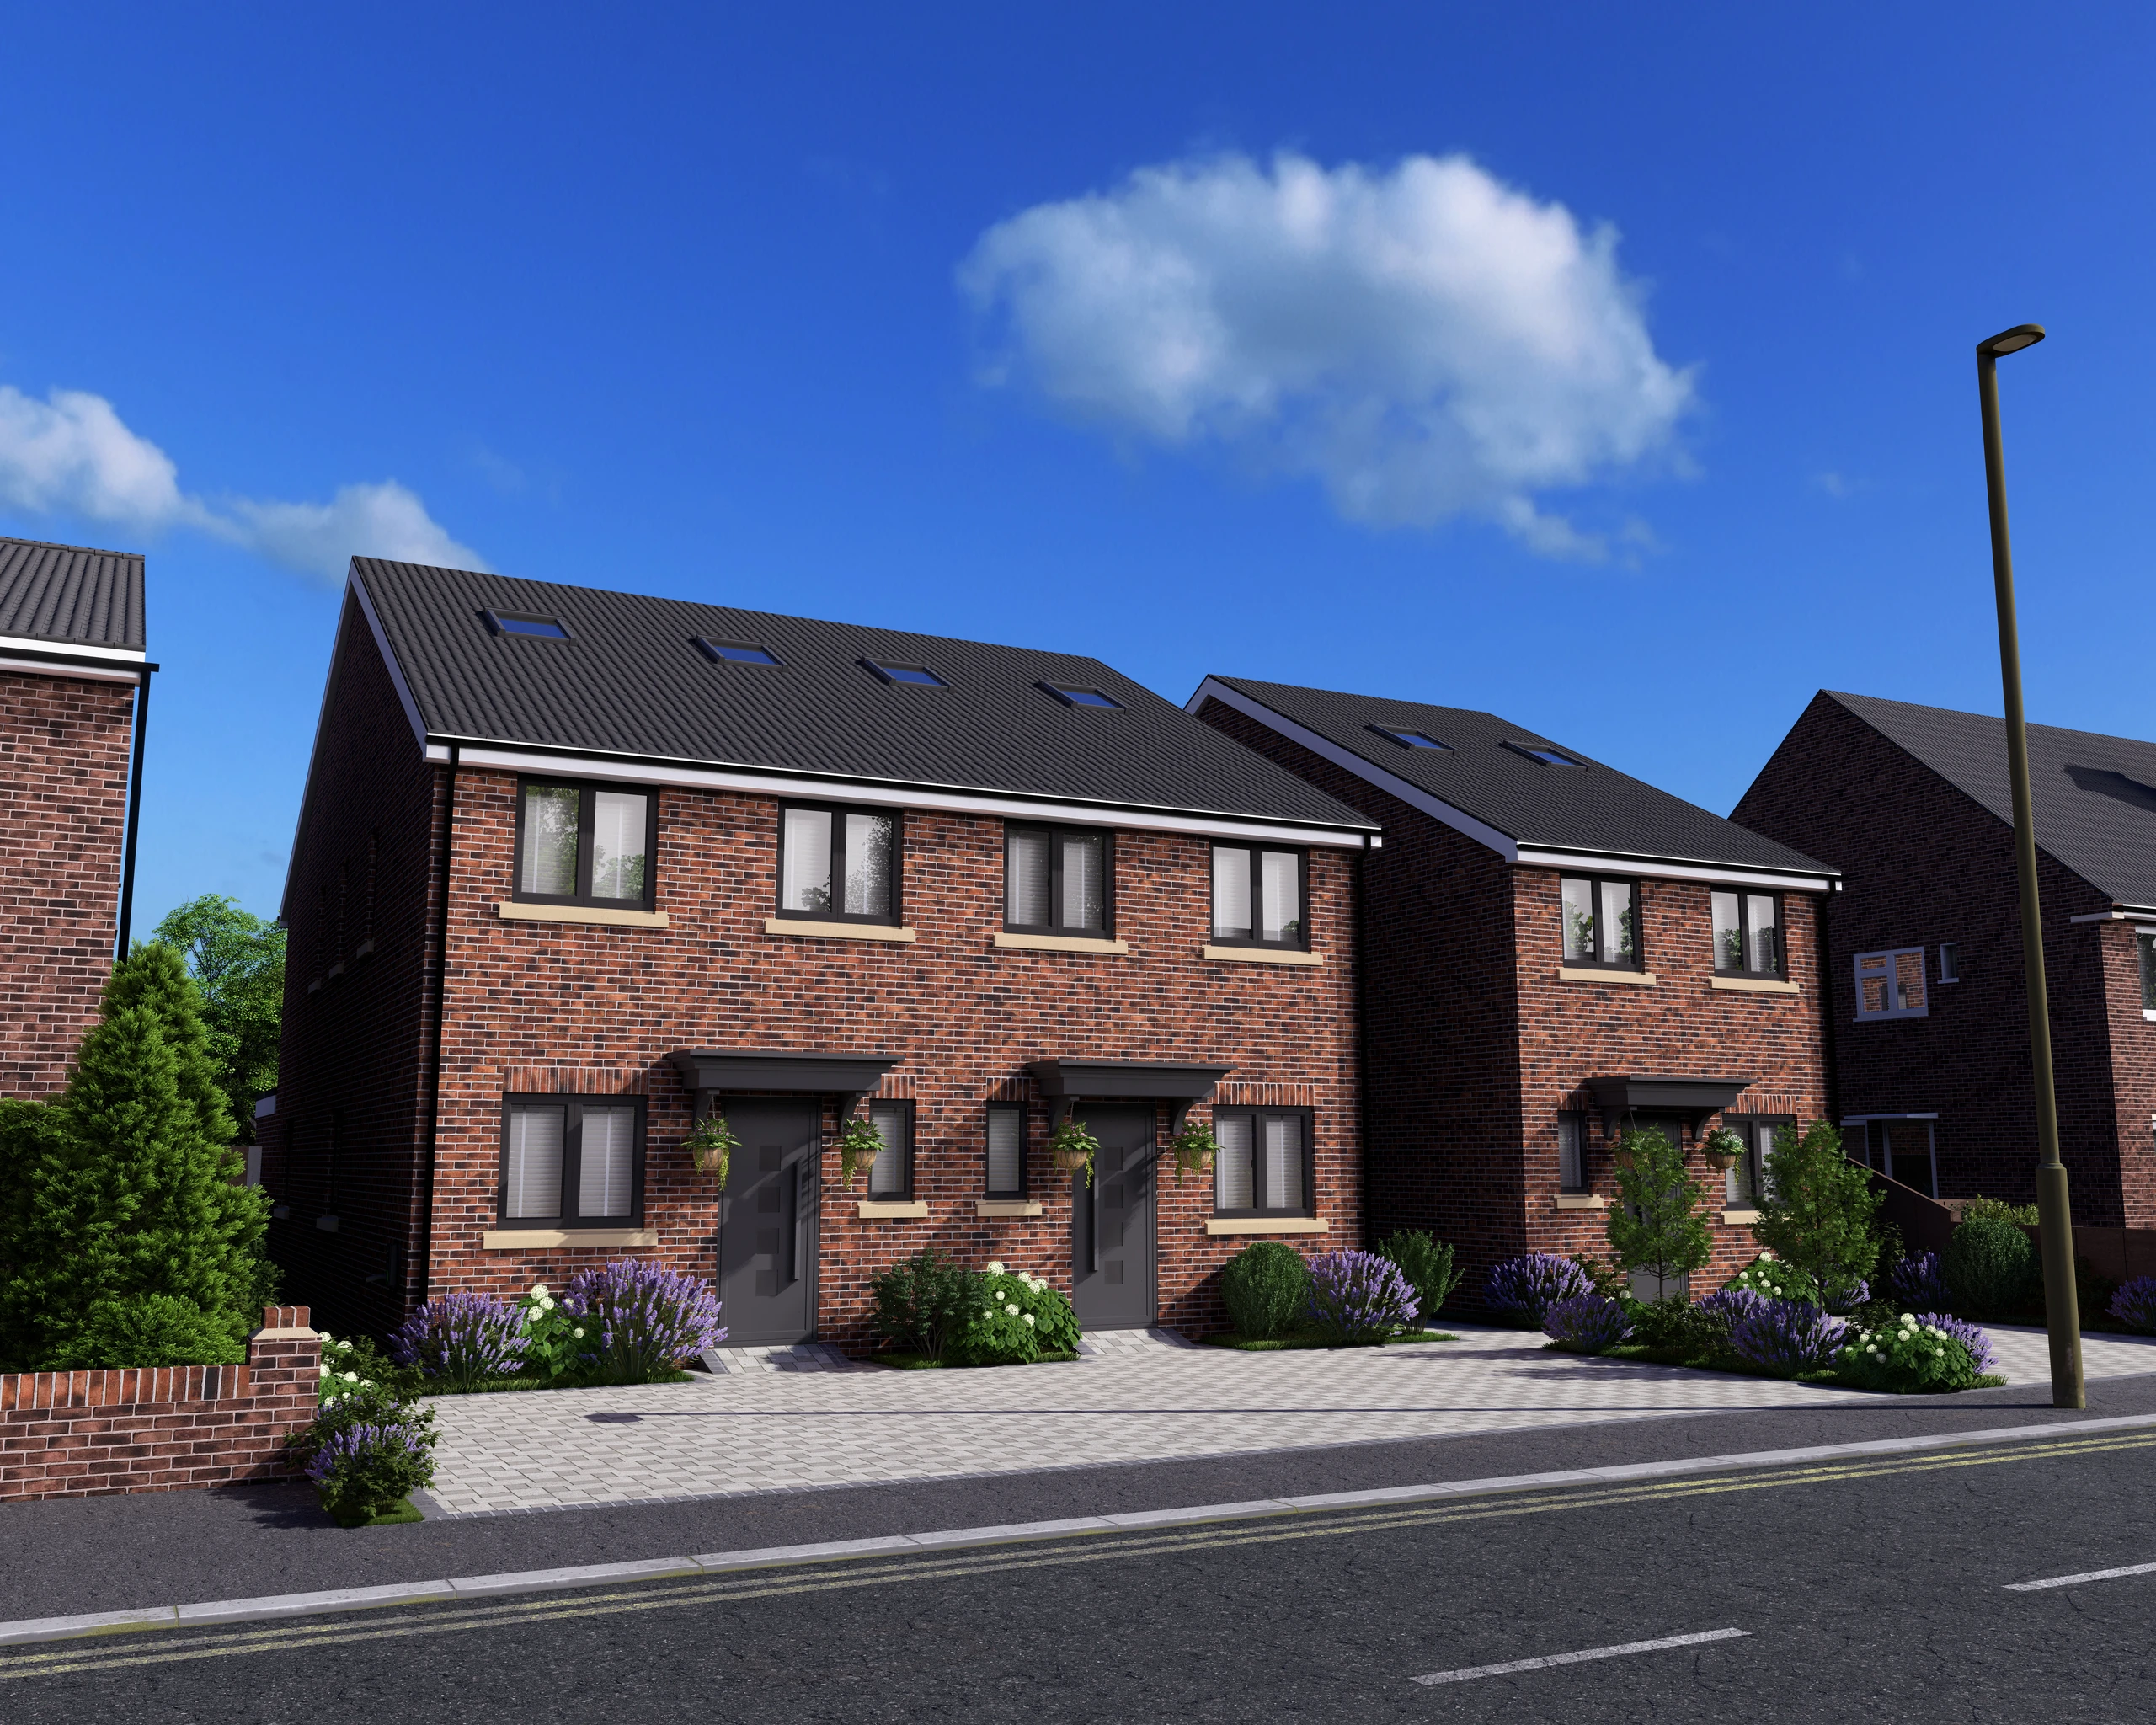 Architectural CGI of New Build Homes in Red Brick